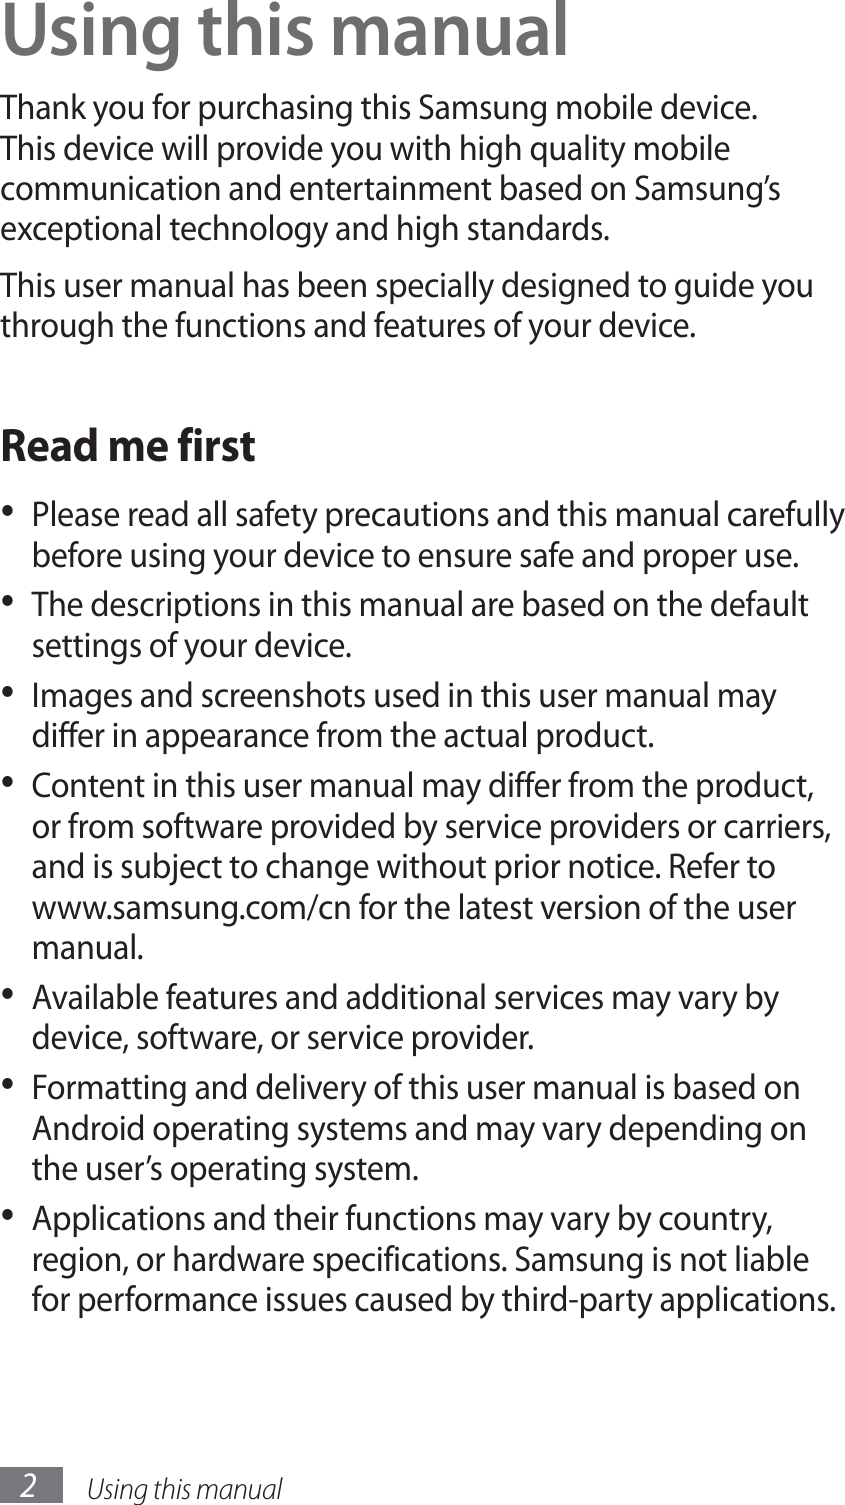 Using this manual2Using this manualThank you for purchasing this Samsung mobile device. This device will provide you with high quality mobile communication and entertainment based on Samsung’s exceptional technology and high standards.This user manual has been specially designed to guide you through the functions and features of your device.Read me firstPlease read all safety precautions and this manual carefully • before using your device to ensure safe and proper use.The descriptions in this manual are based on the default • settings of your device. Images and screenshots used in this user manual may • differ in appearance from the actual product.Content in this user manual may differ from the product, • or from software provided by service providers or carriers, and is subject to change without prior notice. Refer to www.samsung.com/cn for the latest version of the user manual.Available features and additional services may vary by • device, software, or service provider.Formatting and delivery of this user manual is based on • Android operating systems and may vary depending on the user’s operating system.Applications and their functions may vary by country, • region, or hardware specifications. Samsung is not liable for performance issues caused by third-party applications.